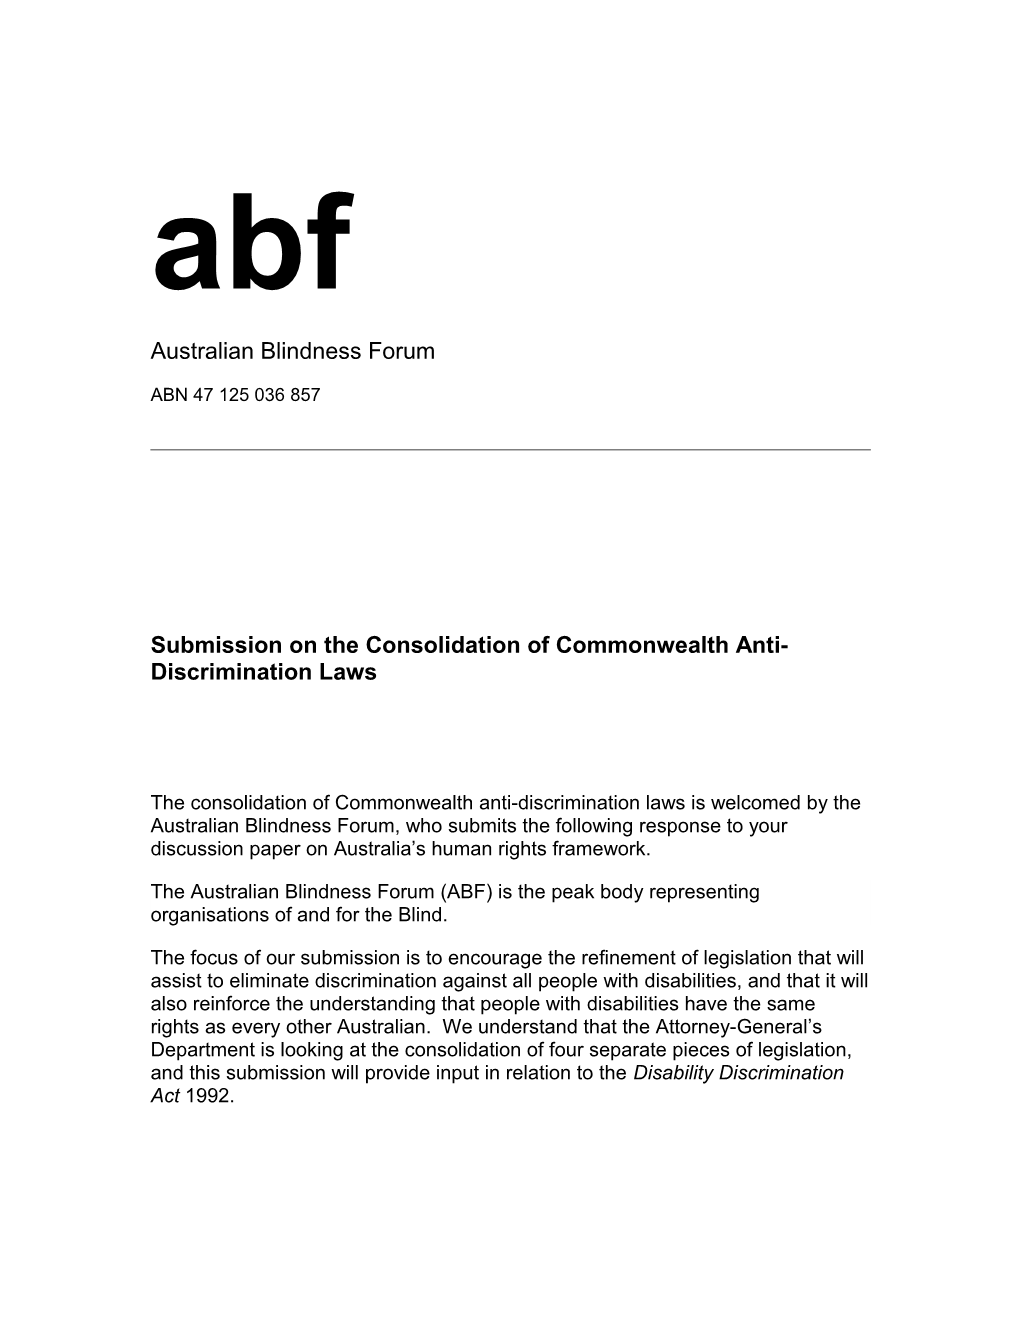 Submission on the Consolidation of Commonwealth Anti-Discrimination Lawsaustralian Blindness